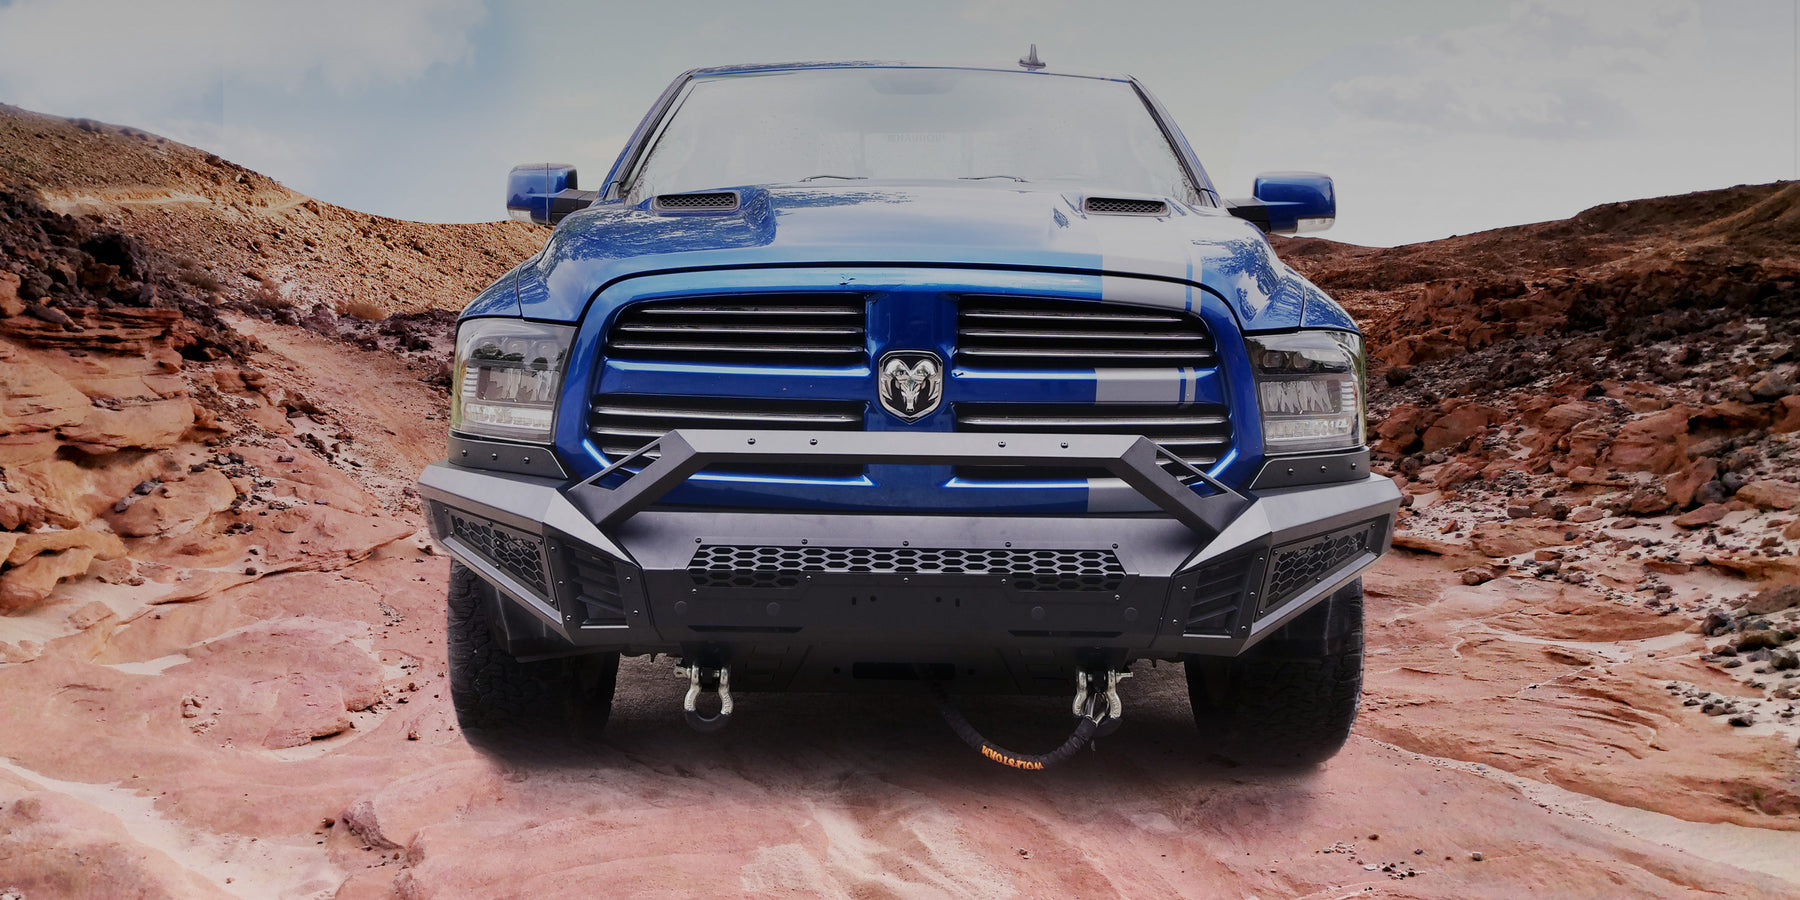 Dodge Ram with WOLFSTORM Offroad: Power, Durability, and Custom Upgrades